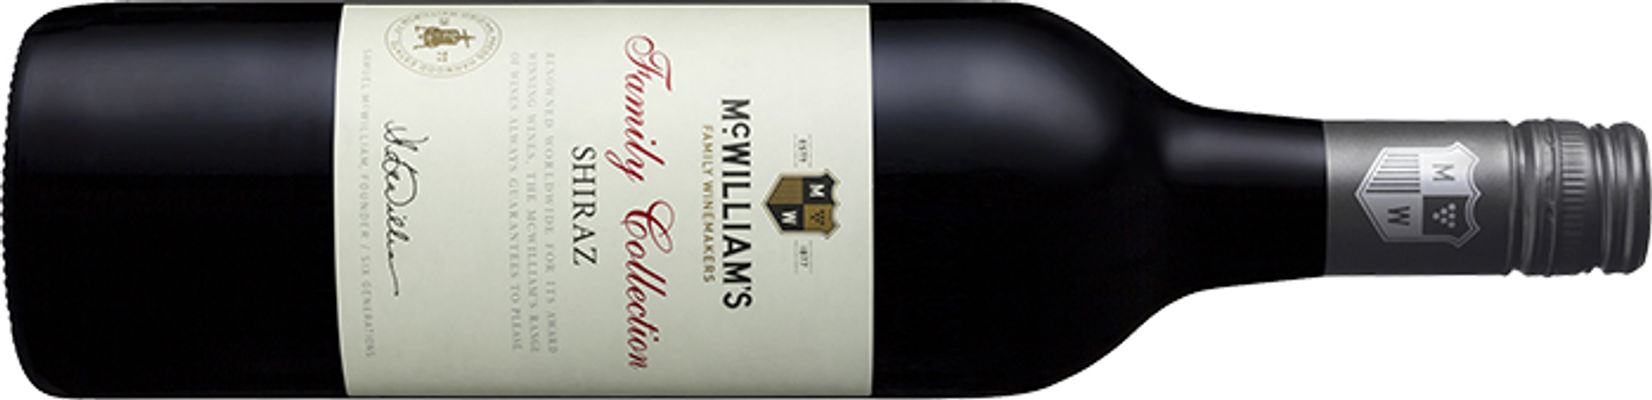 Mcwilliams Family Collection Shiraz (12 Bottles)